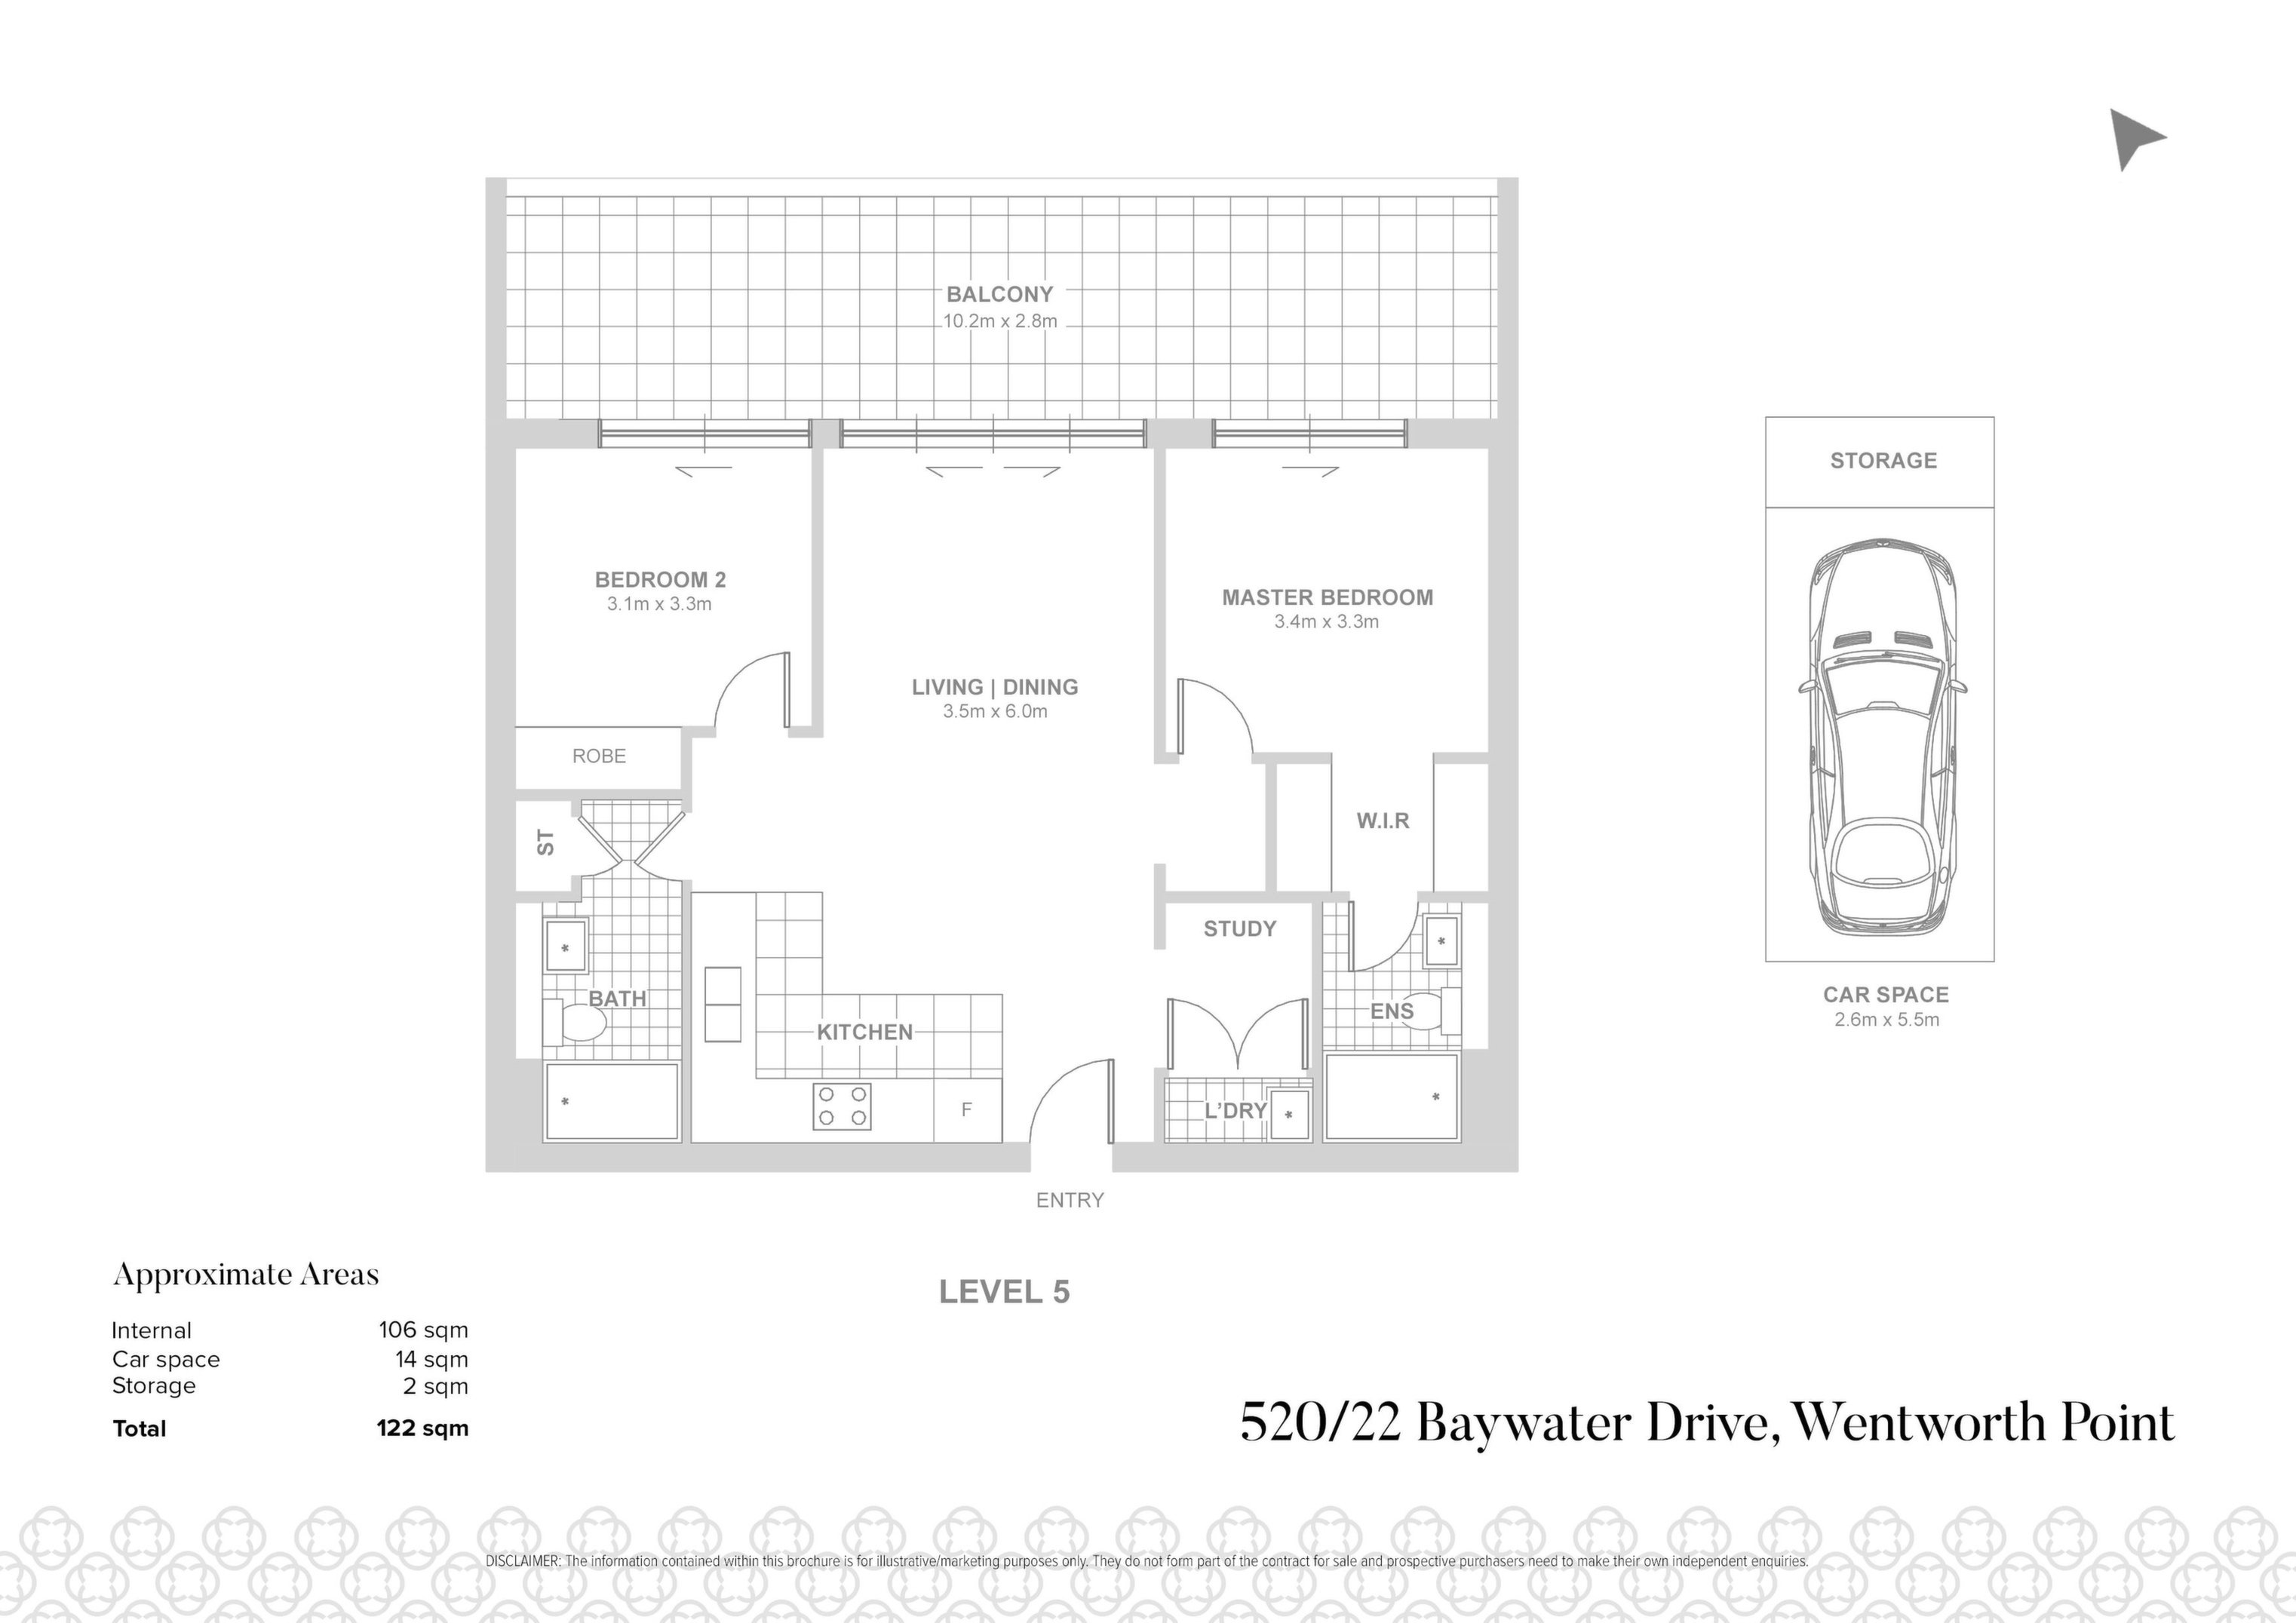 520/22 Baywater Drive, Wentworth Point Sold by Chidiac Realty - floorplan